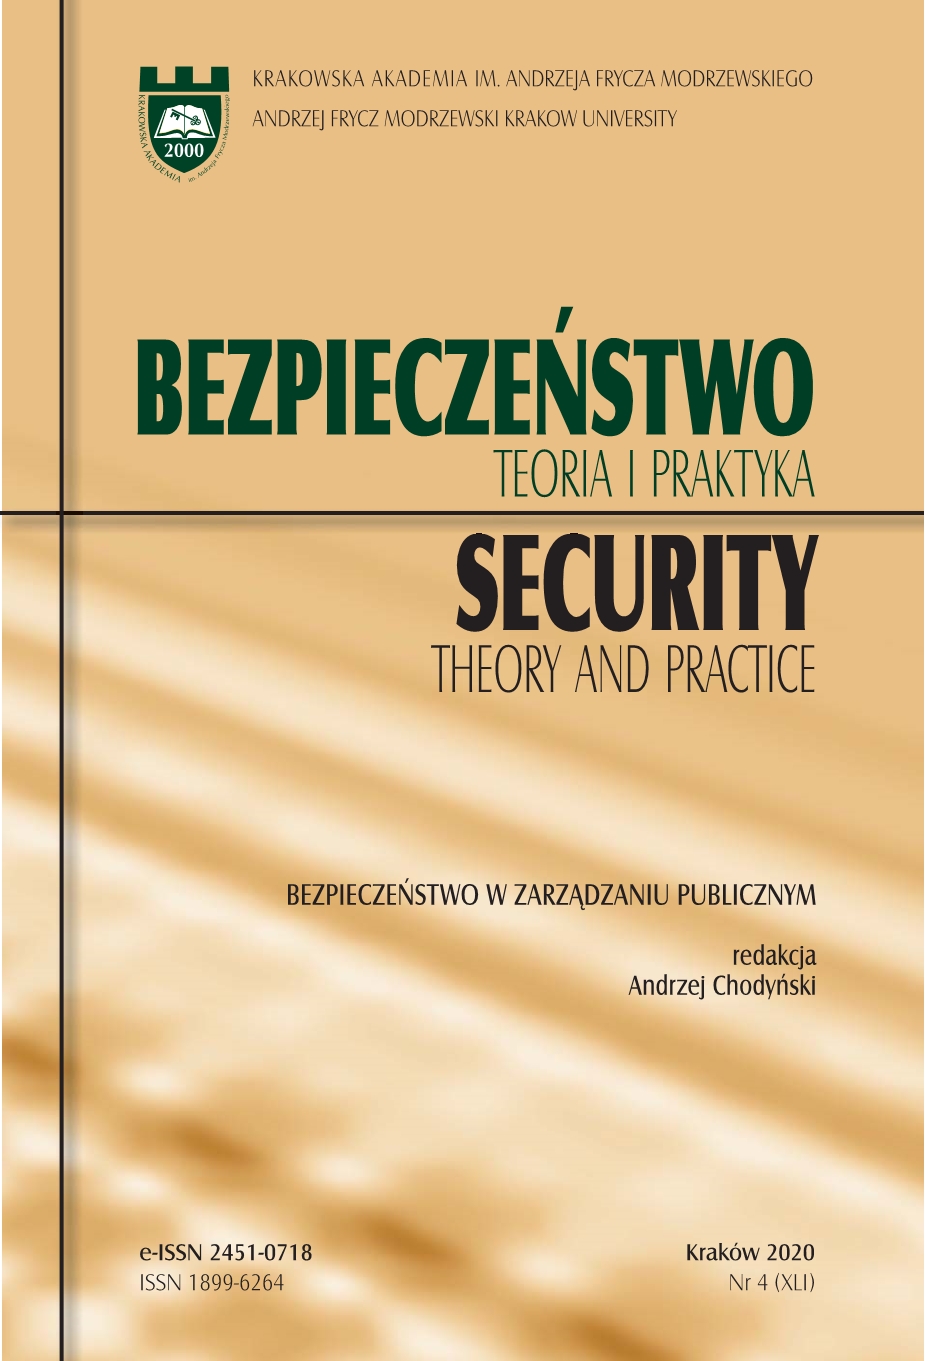 Design-oriented thinking and analyses in the undertakings of local and regional authorities in the field of security and public order: a methodological approach Cover Image